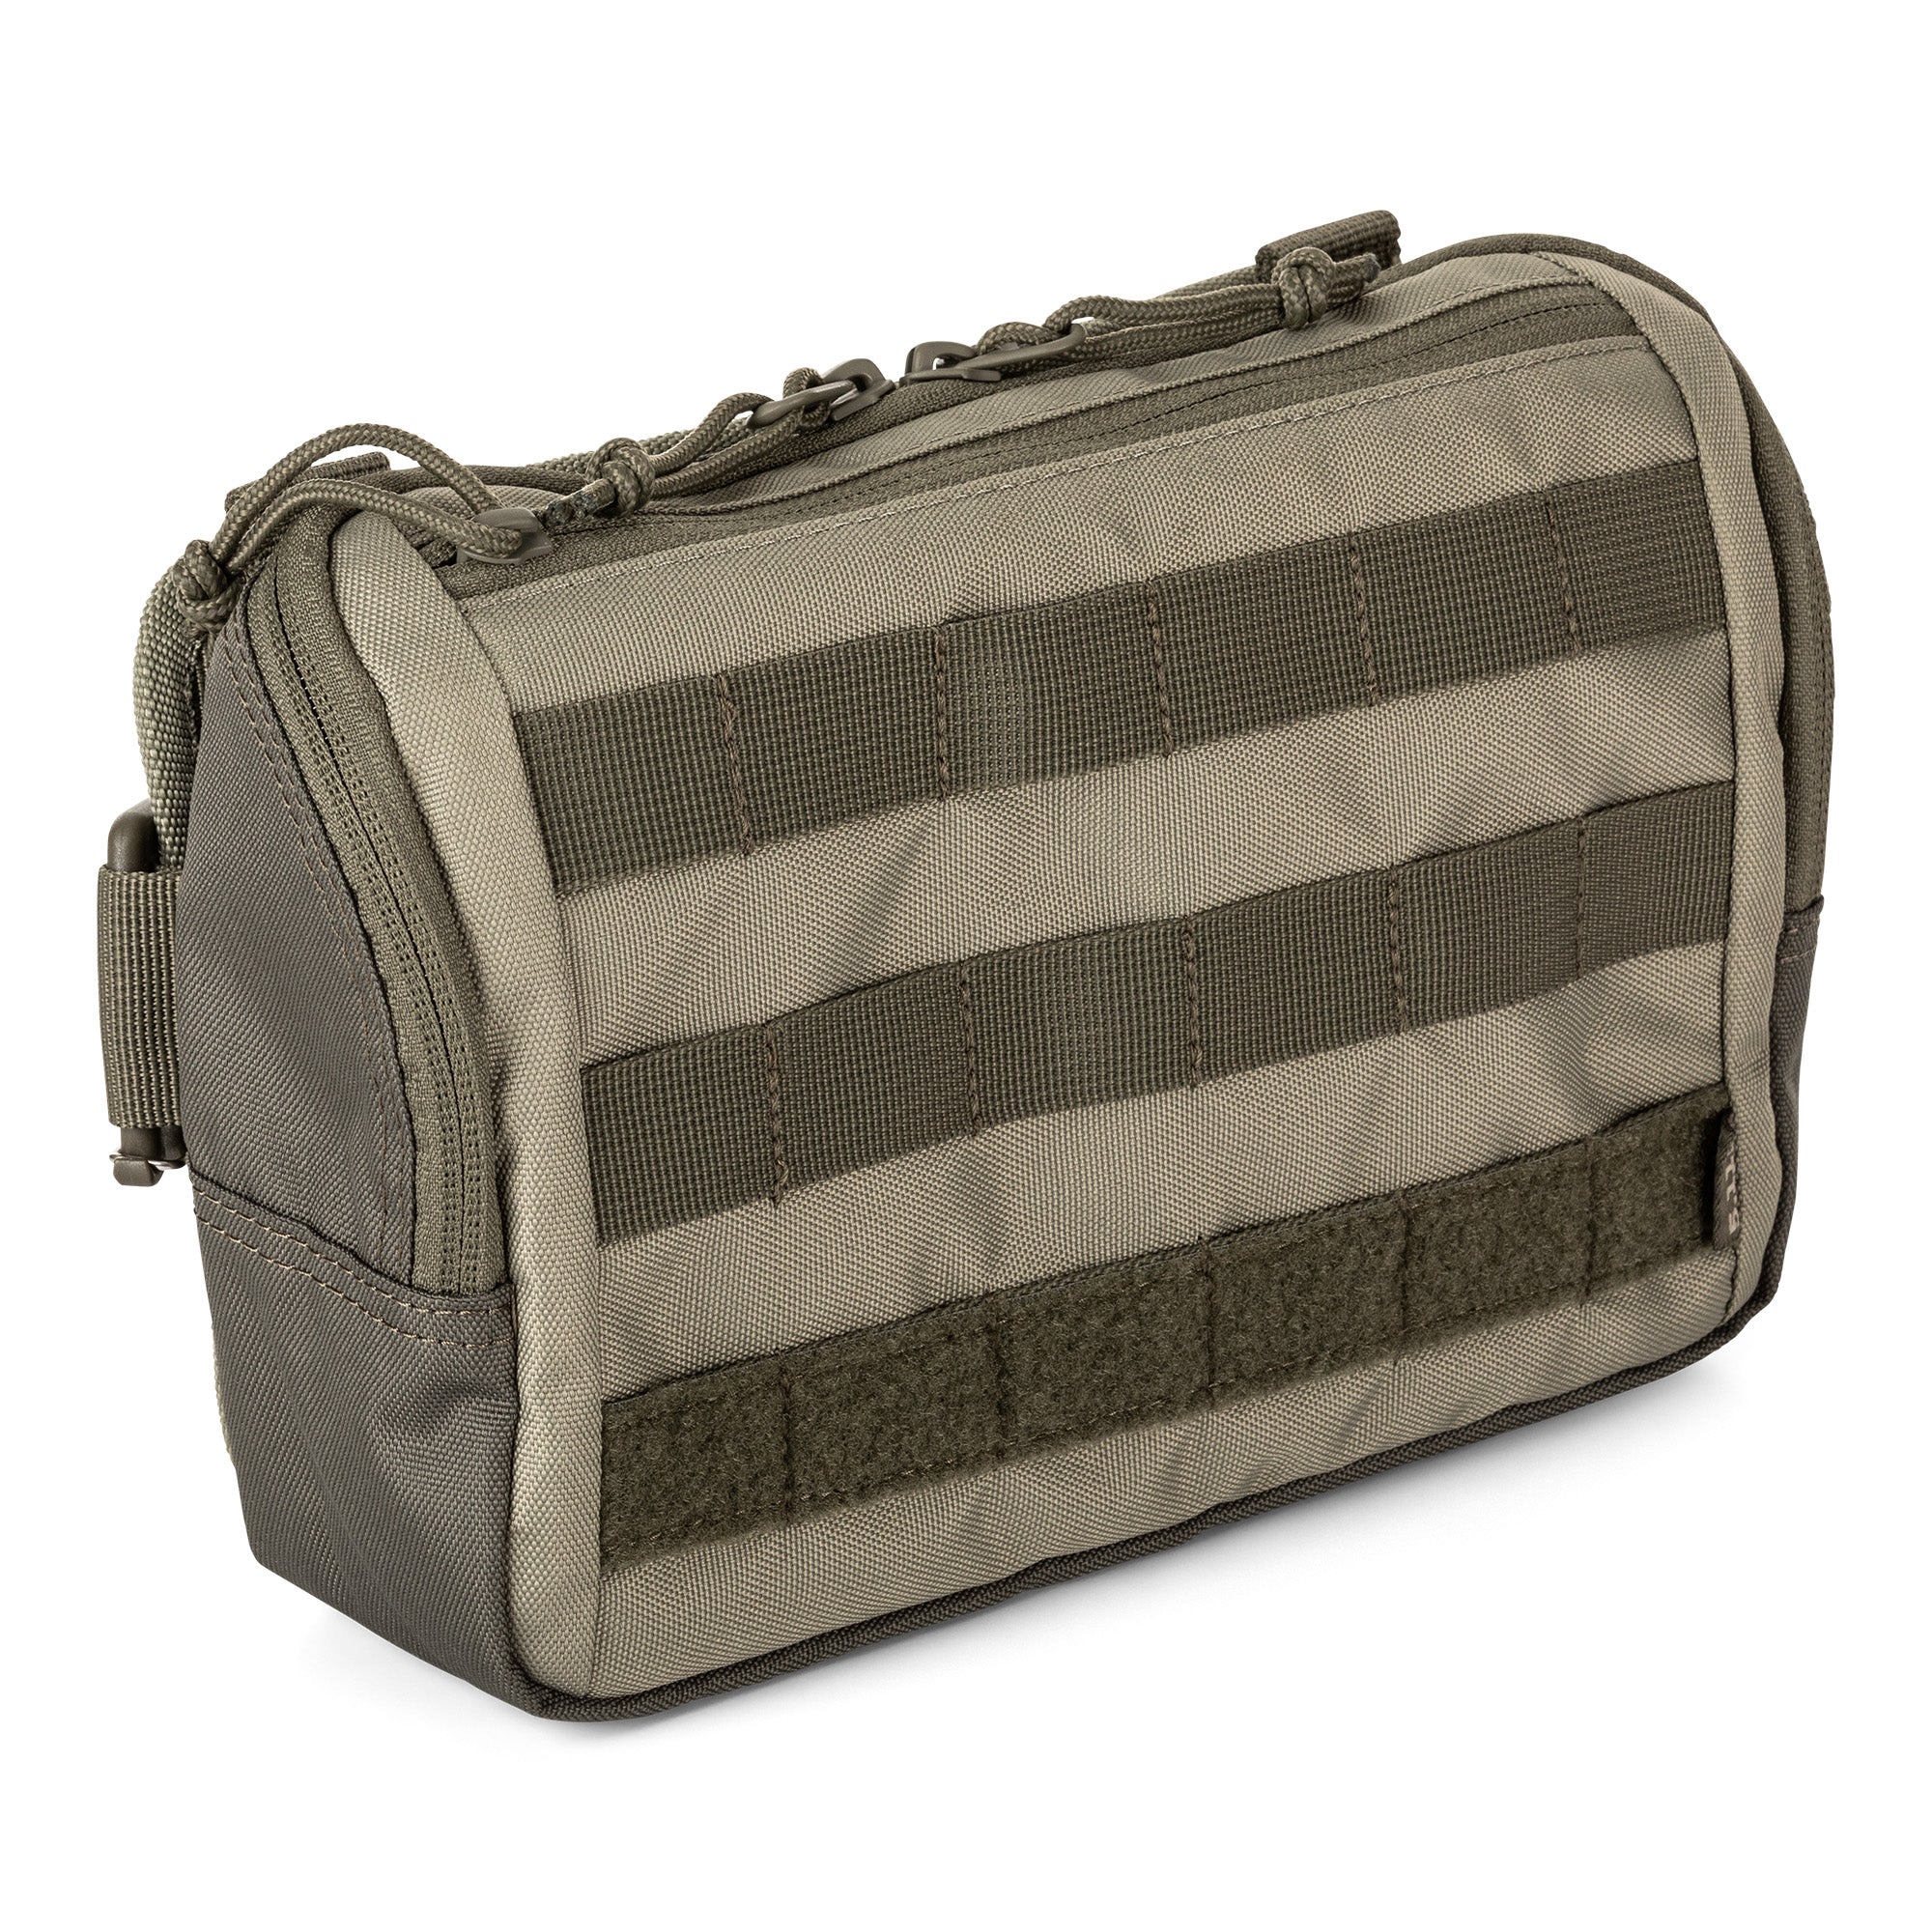 5.11 Tactical Rapid Waist Pack Bags, Packs and Cases 5.11 Tactical Tactical Gear Supplier Tactical Distributors Australia